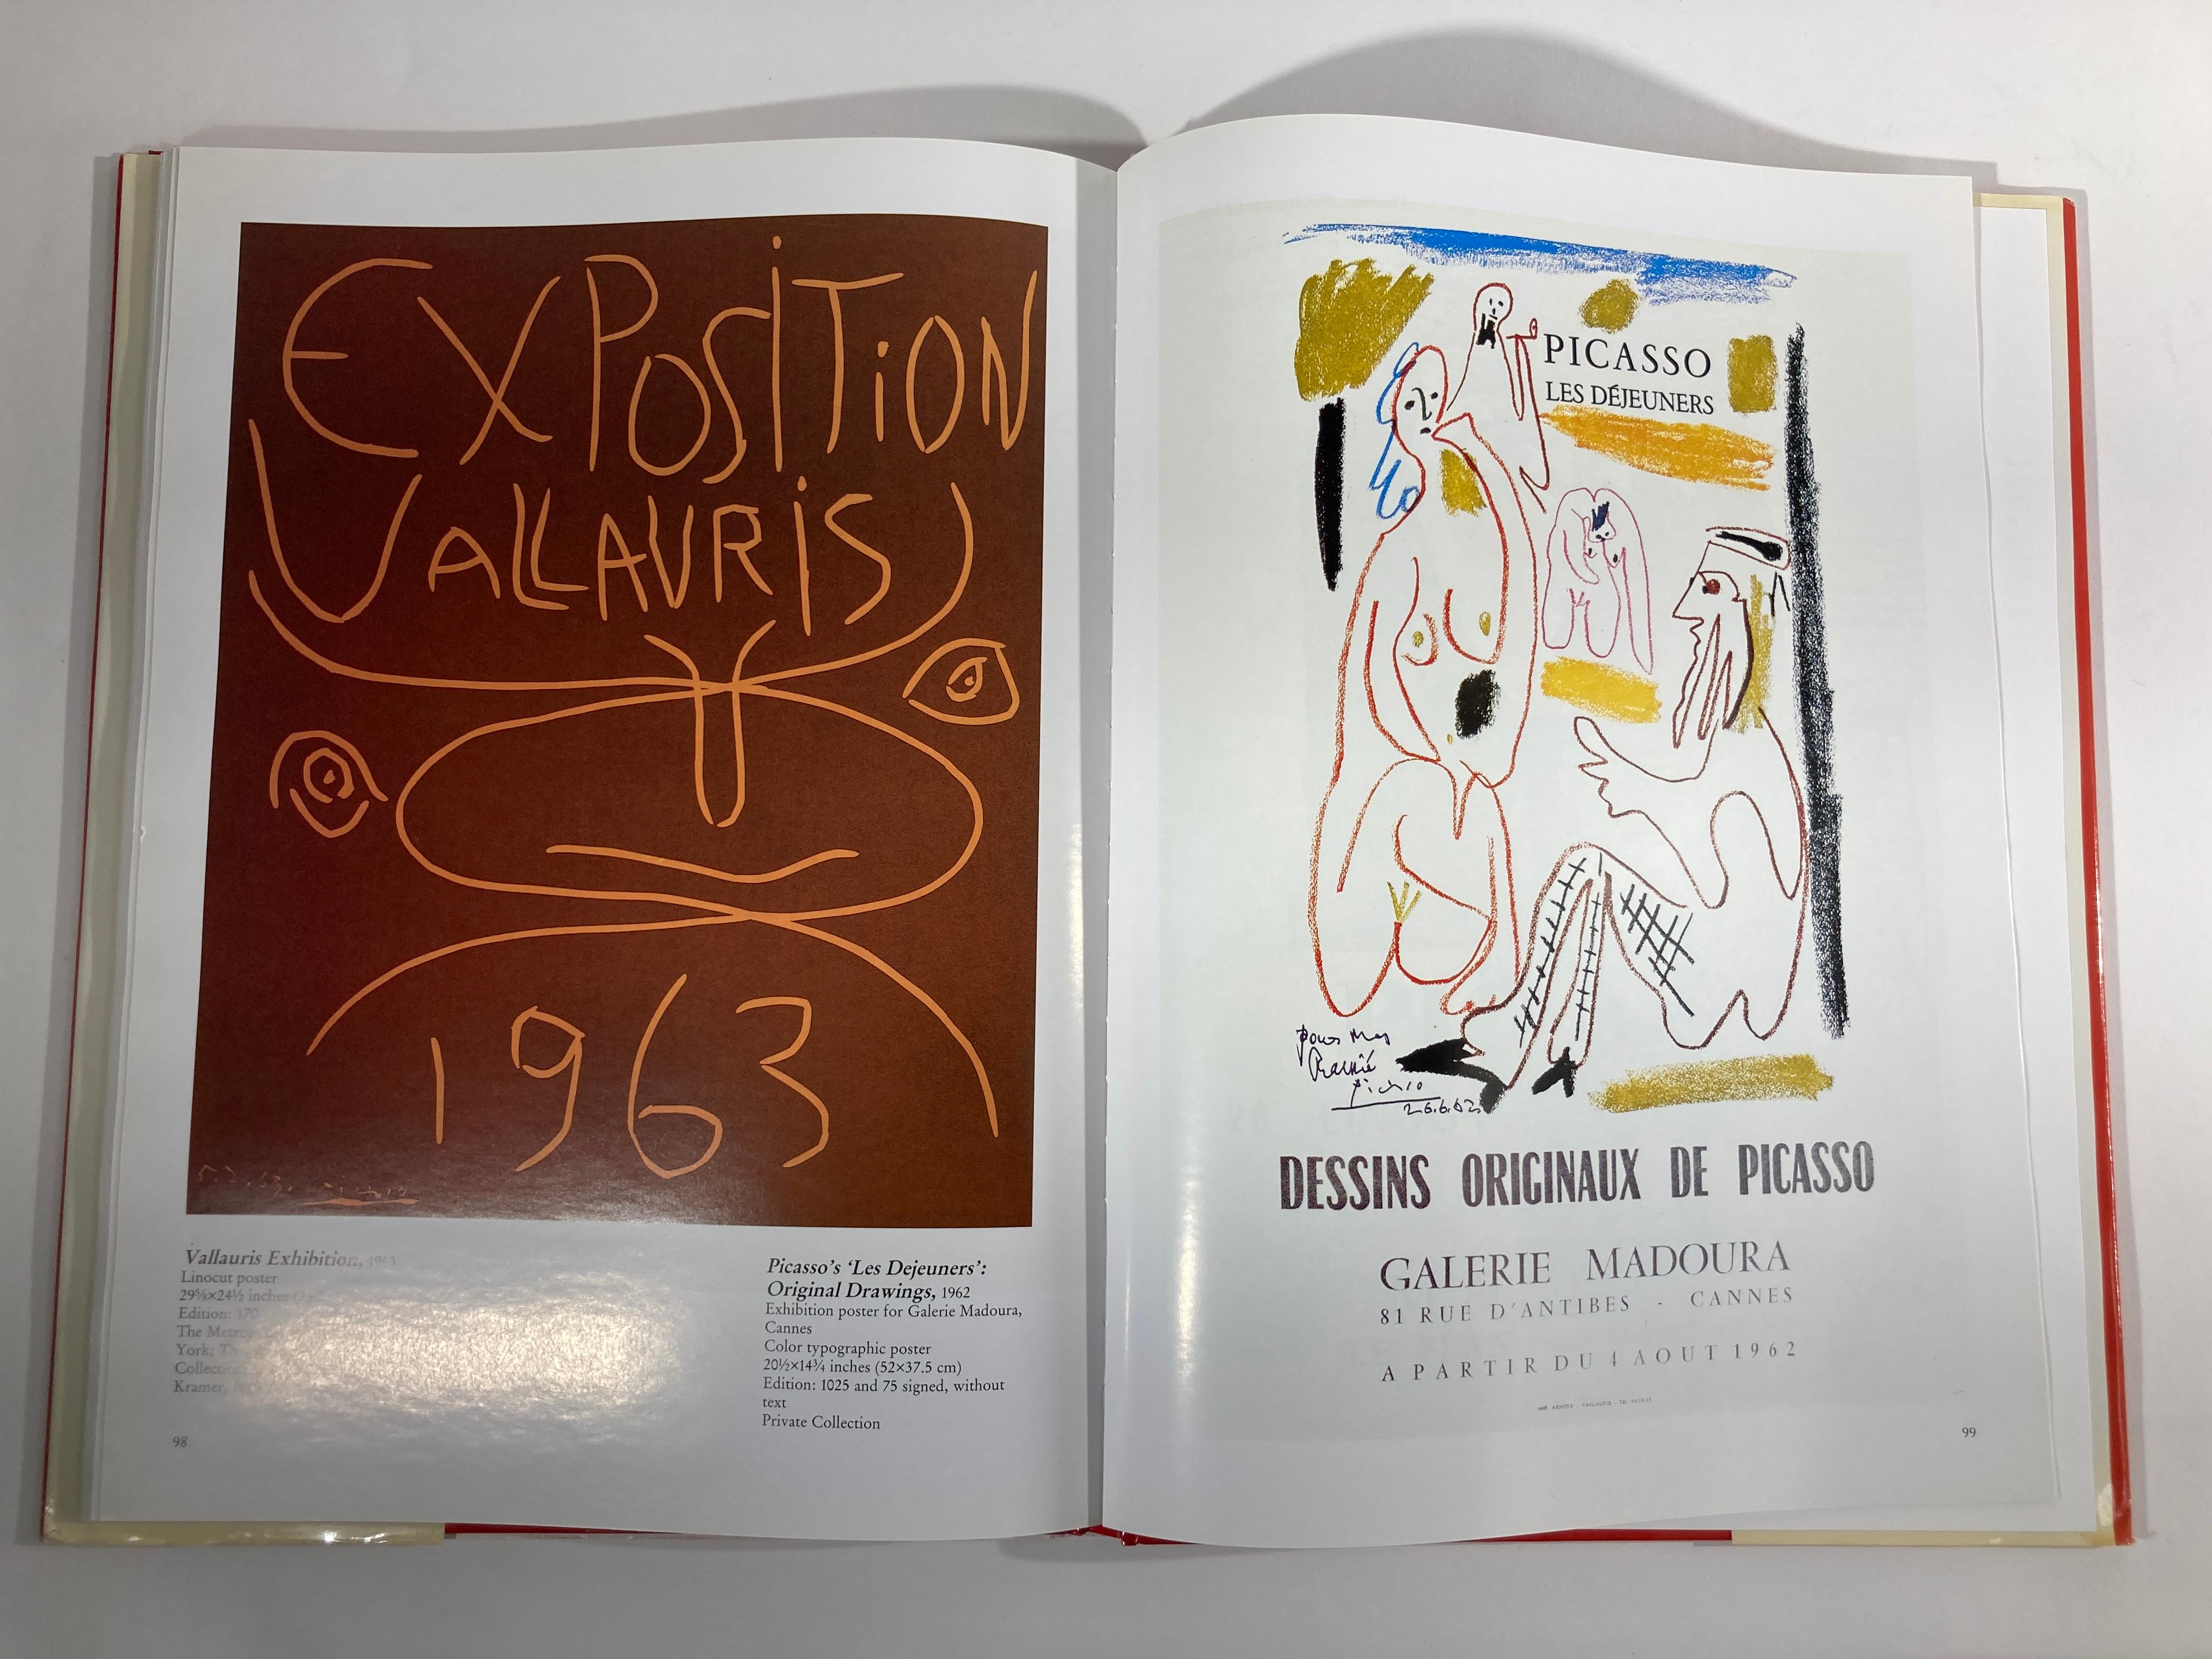 'Picasso Posters' Cubism Red Pablo Picasso Large Hardcover Art Book 6